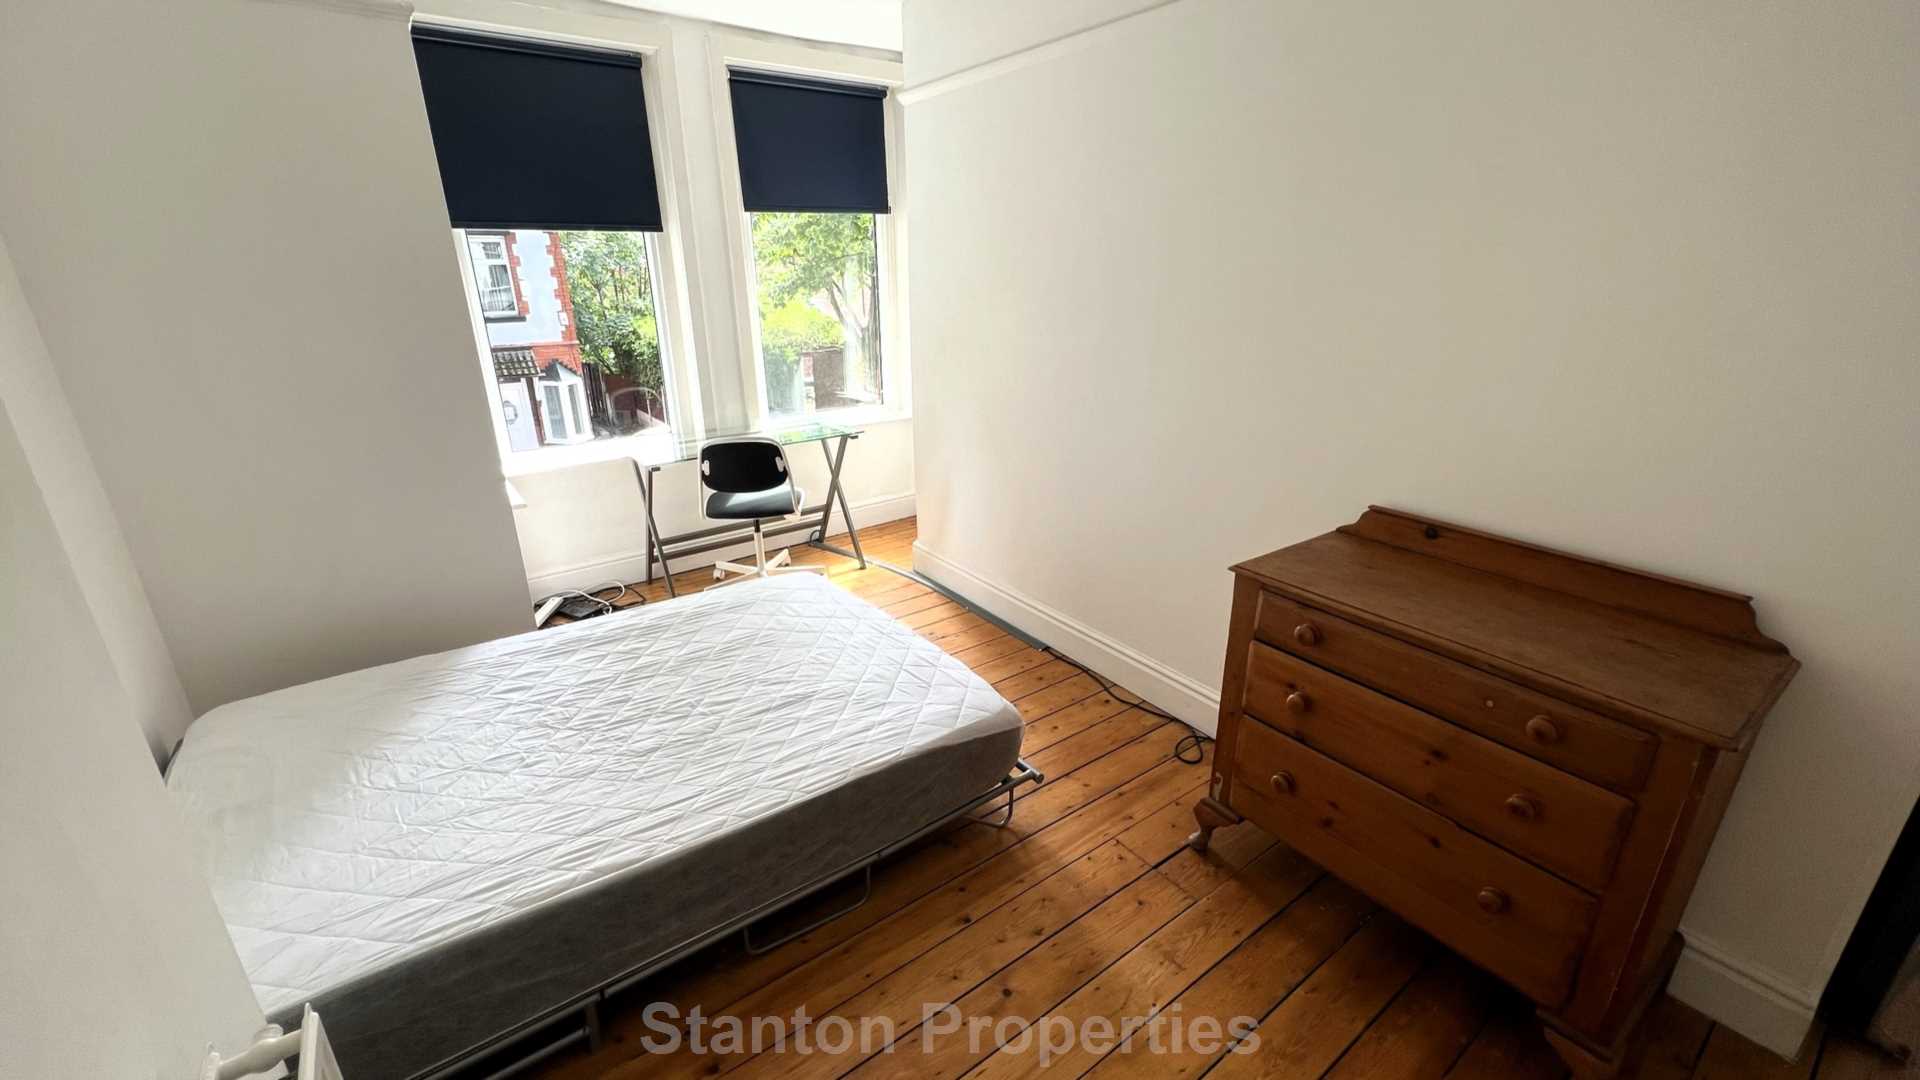 £145 pppw, Linden Grove, Fallowfield, Image 15